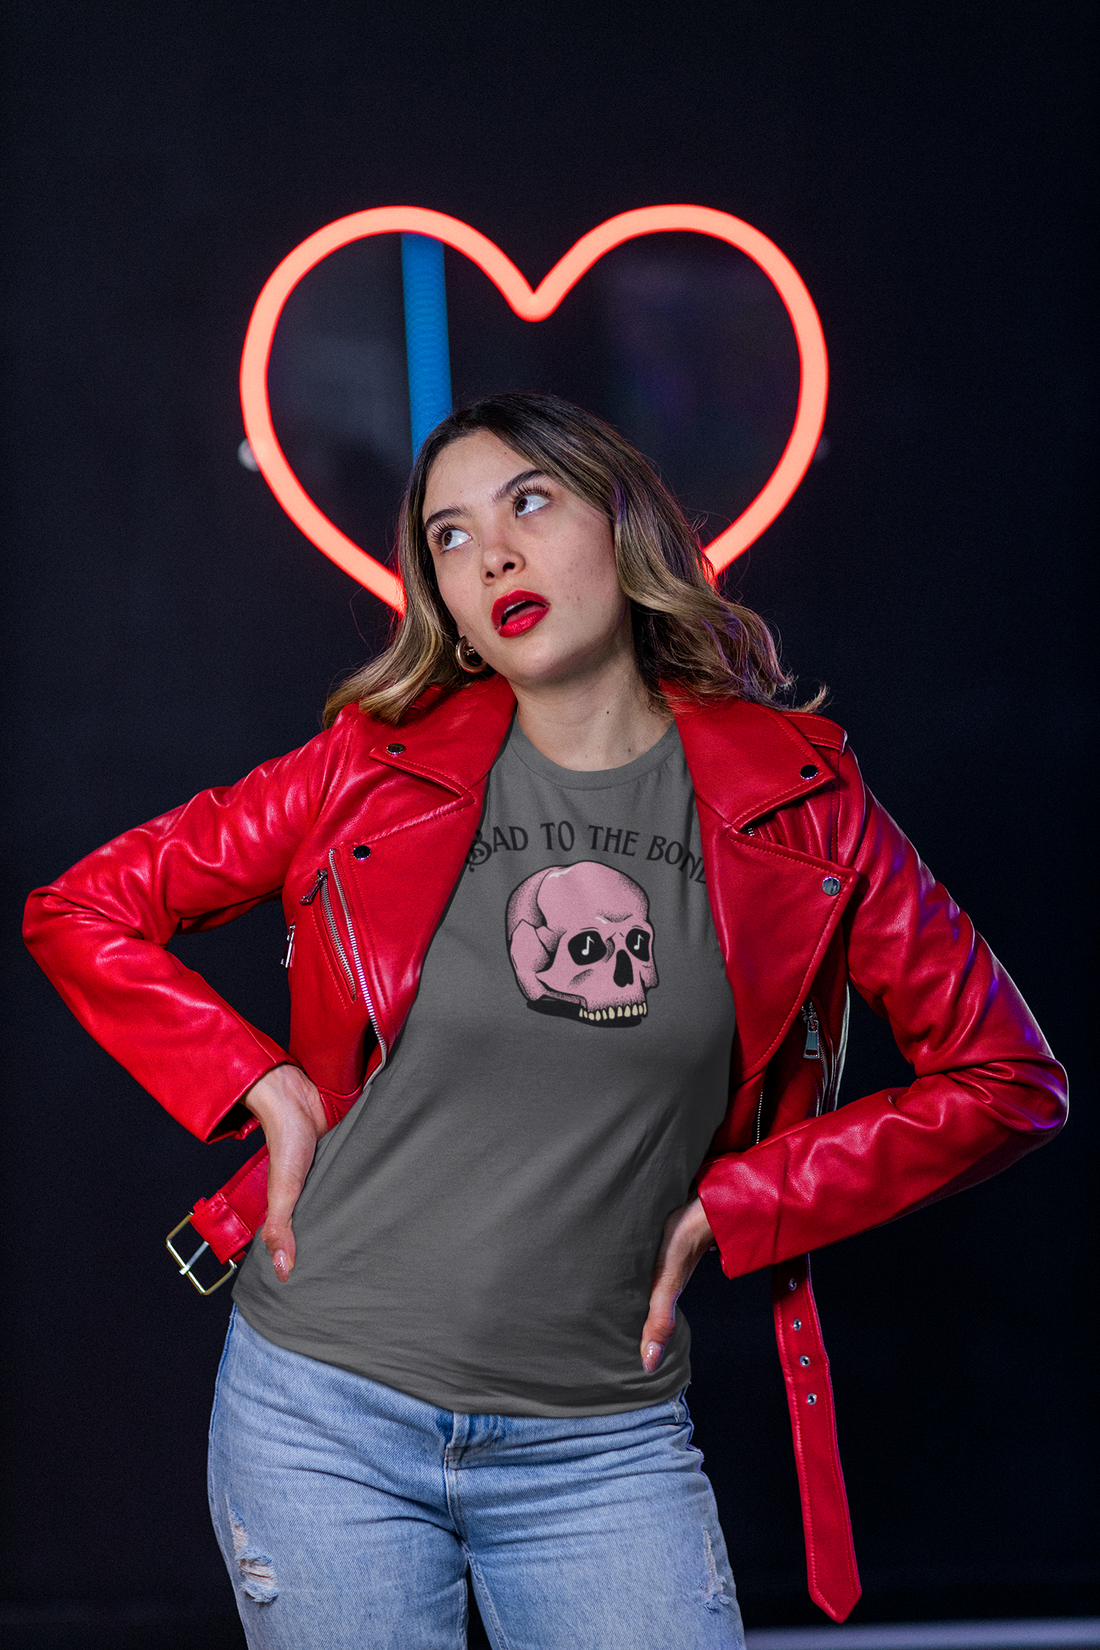 A female standing in fornt of a neon heart, wearing a grey music tshirt with the text "bad to the bones" and the image of a pink skull